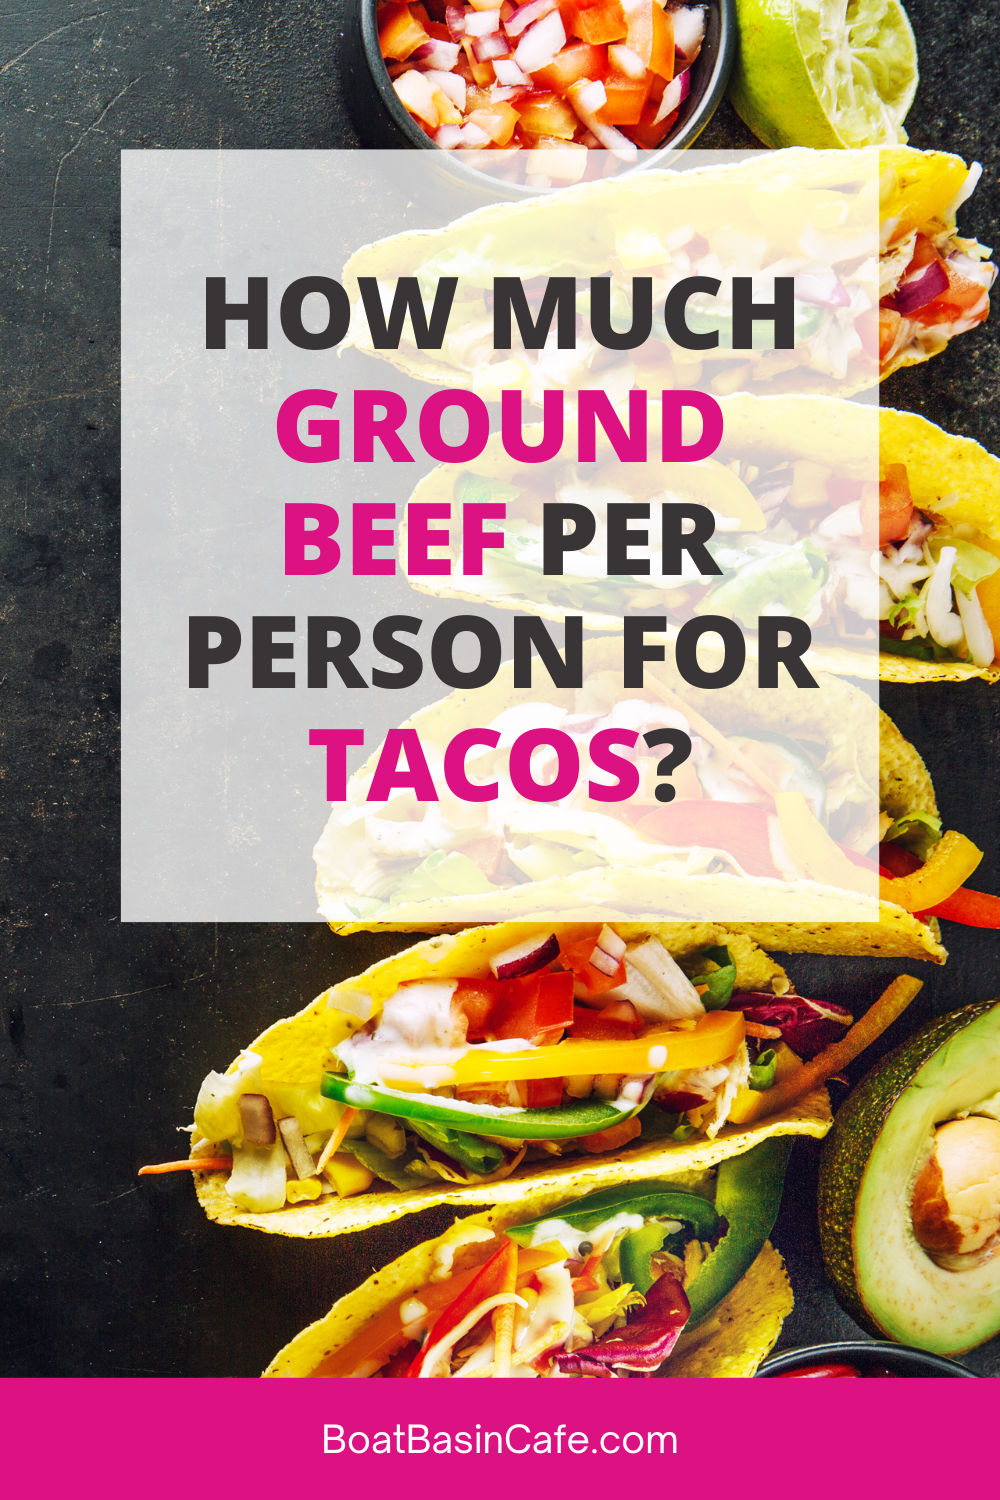 How Many Pounds of Ground Beef per Person for Tacos?